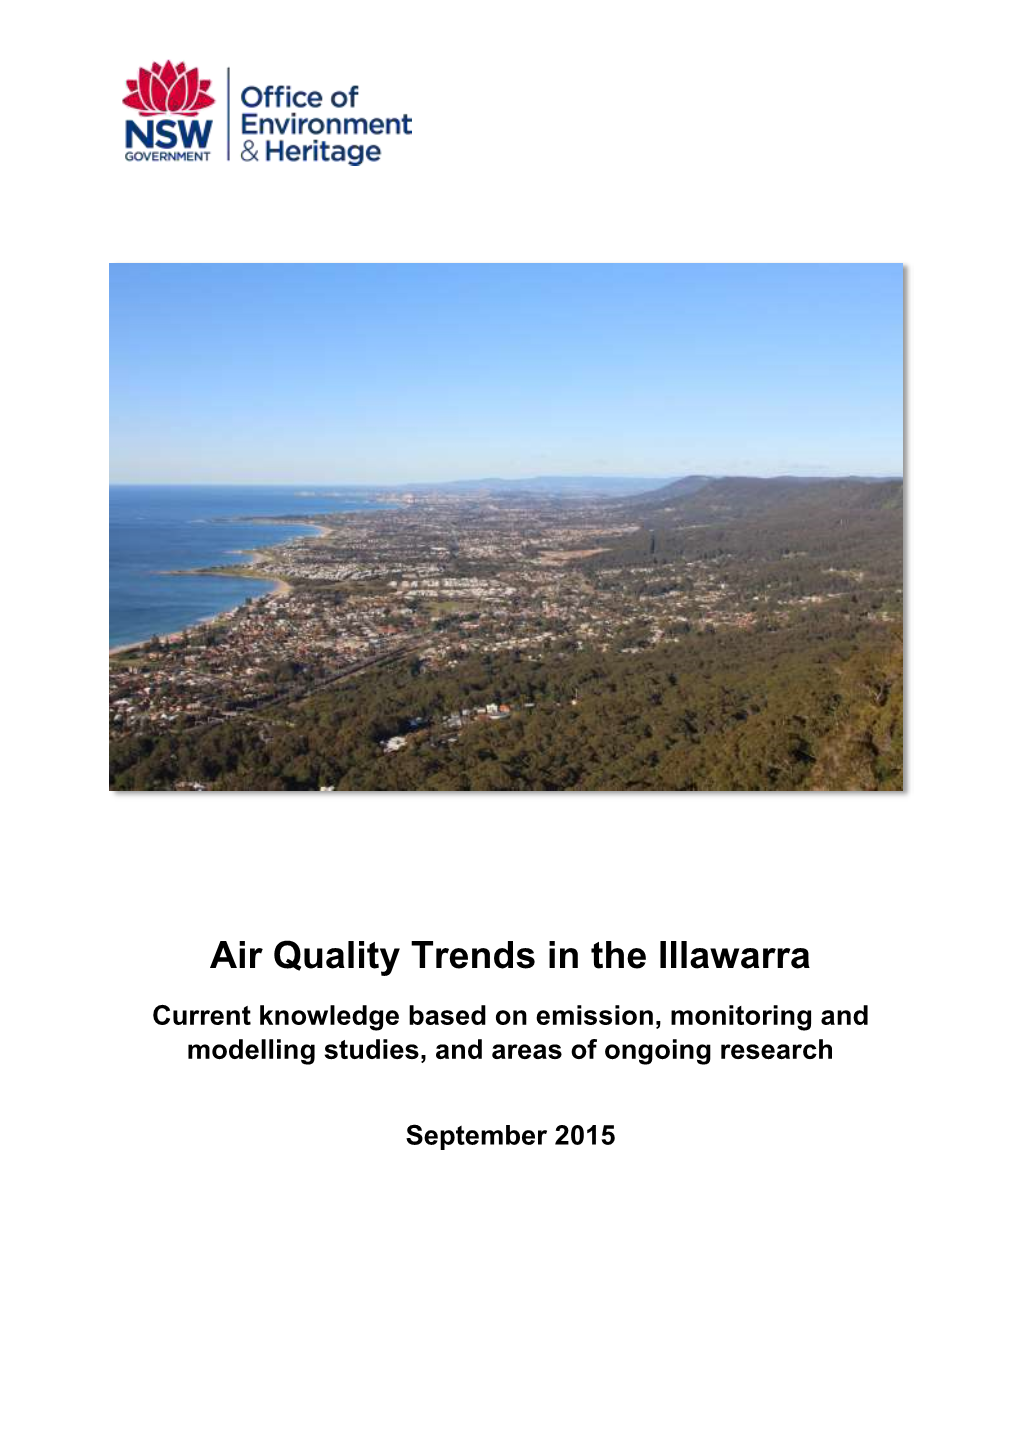 Air Quality Trends in the Illawarra 2015